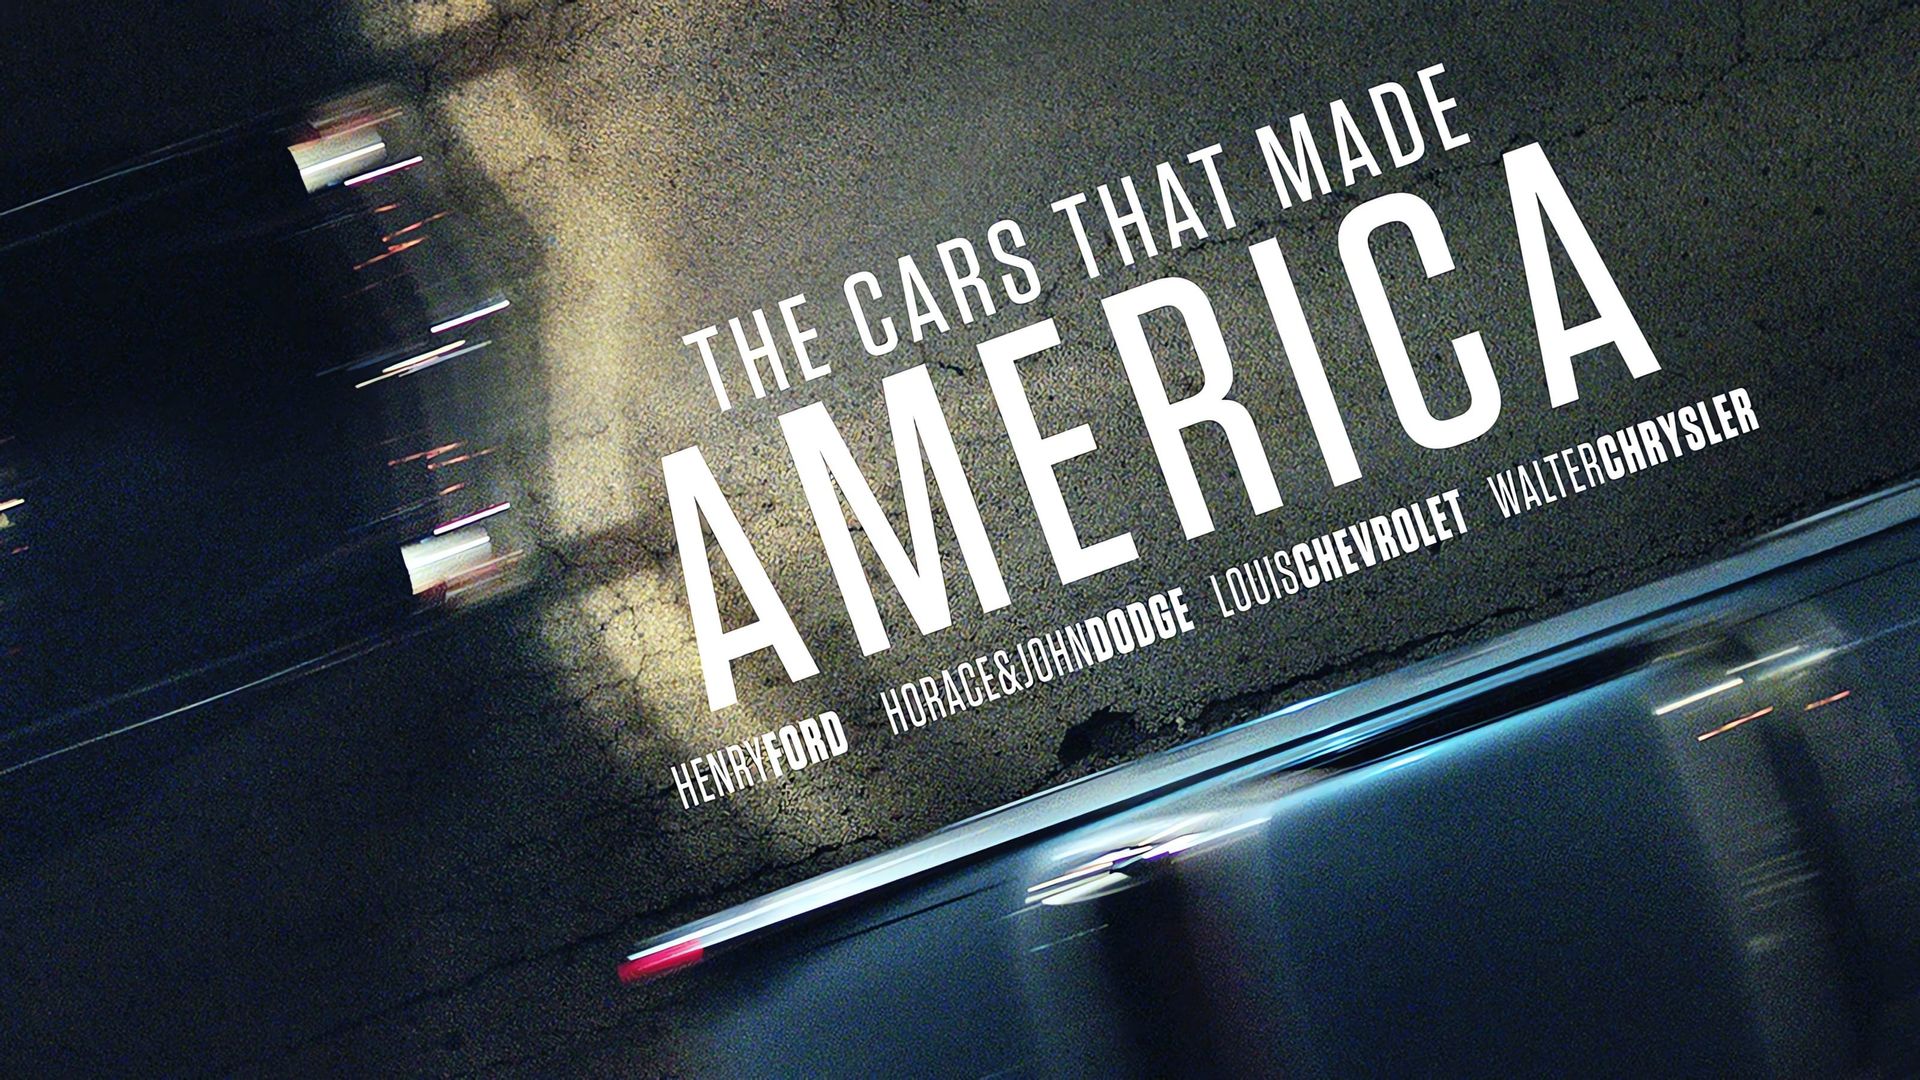 The Cars That Made America background